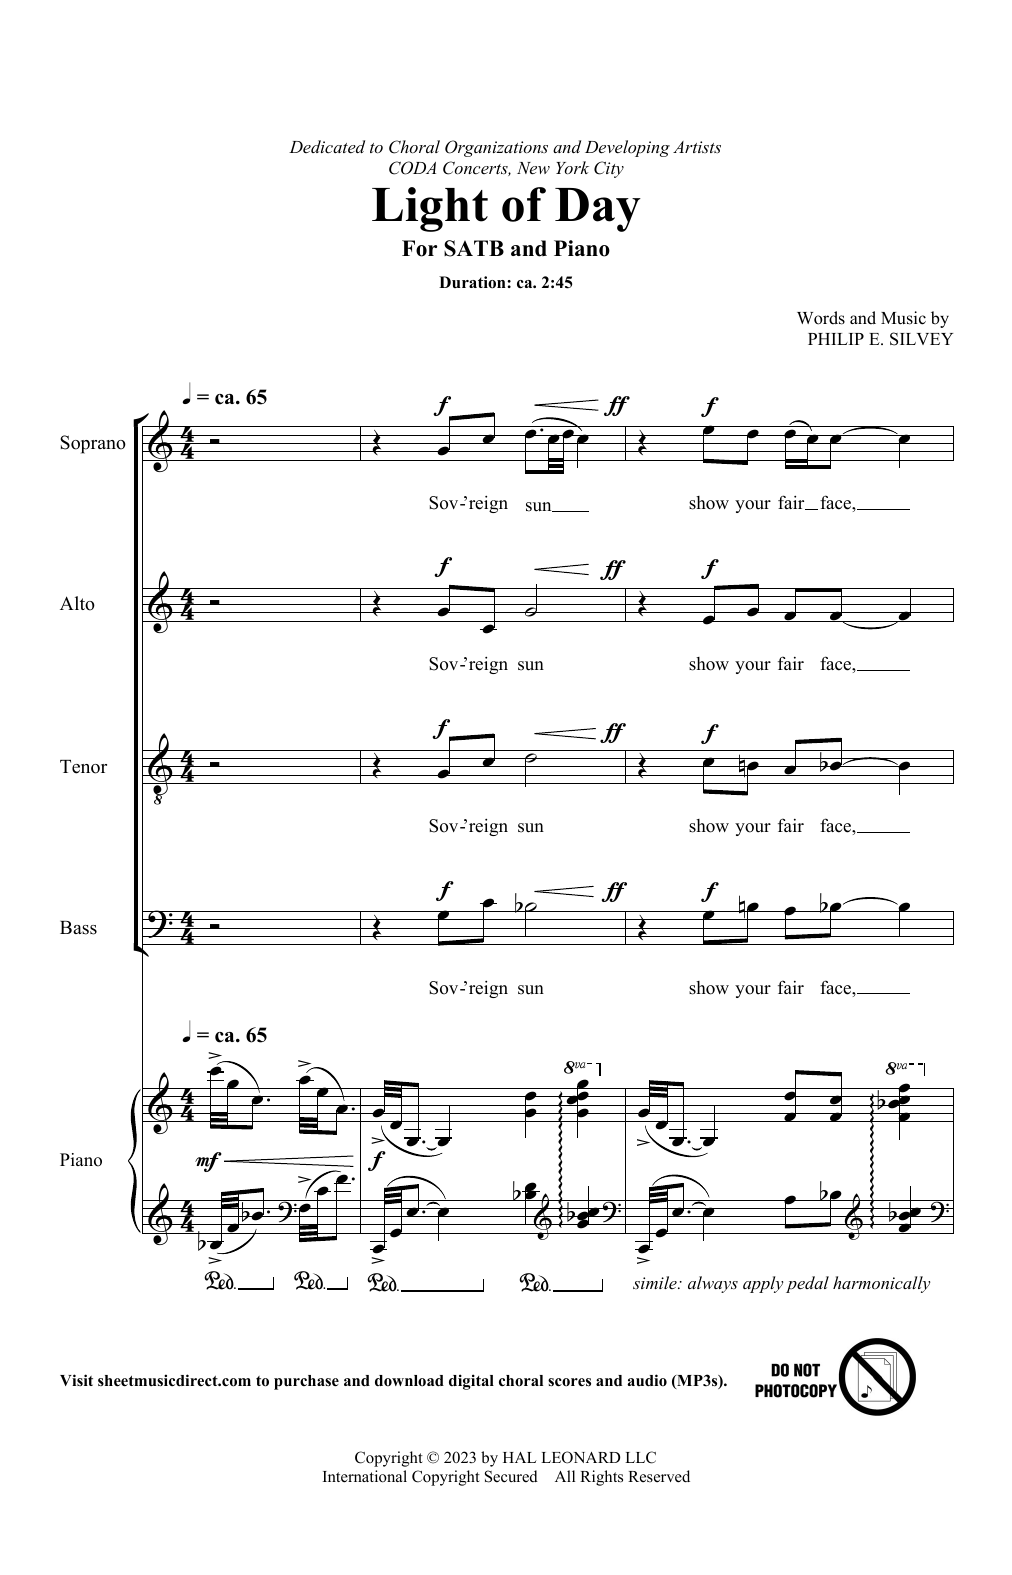 Download Philip Silvey Light Of Day Sheet Music